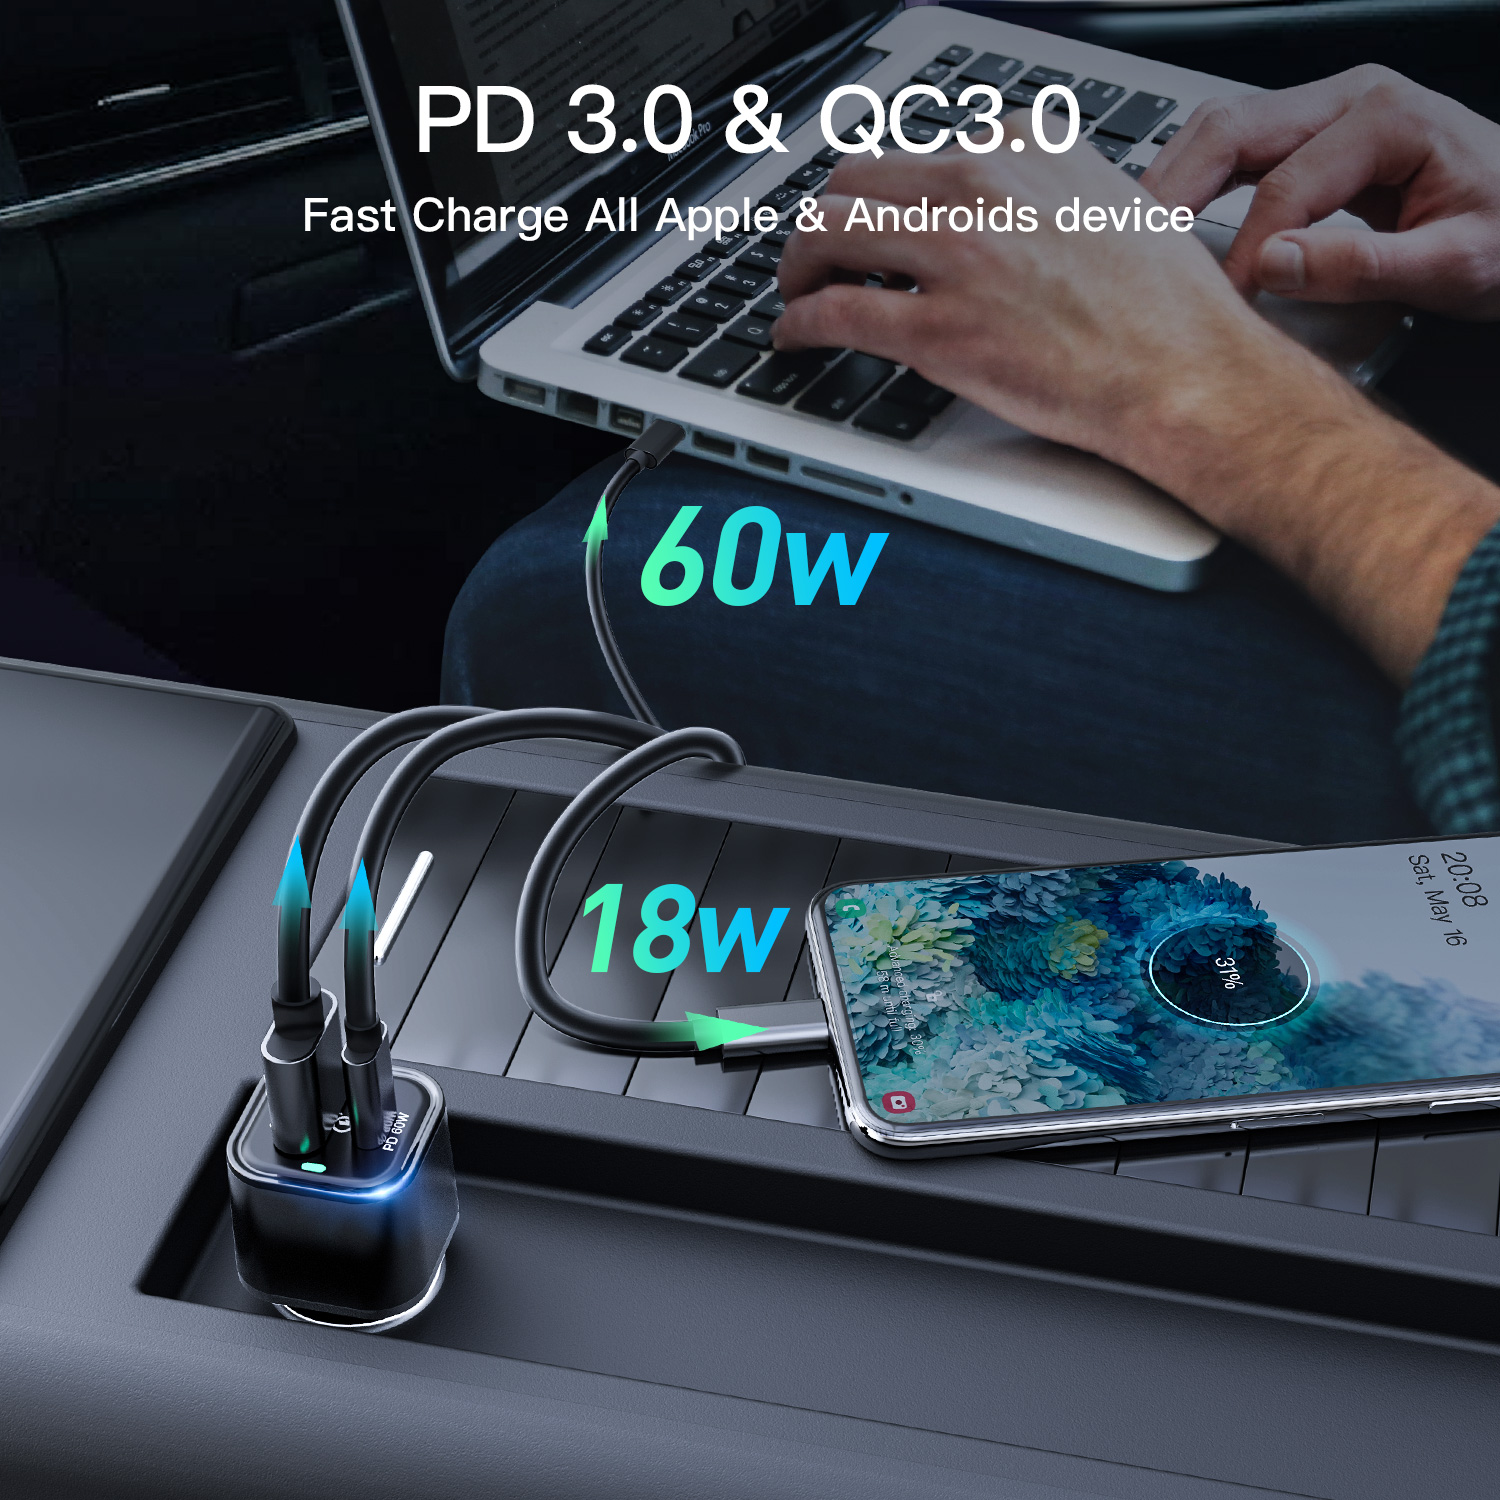 REXING JETSPEED Black 78W PowerDelivery+ USB-C/USB Car Charger